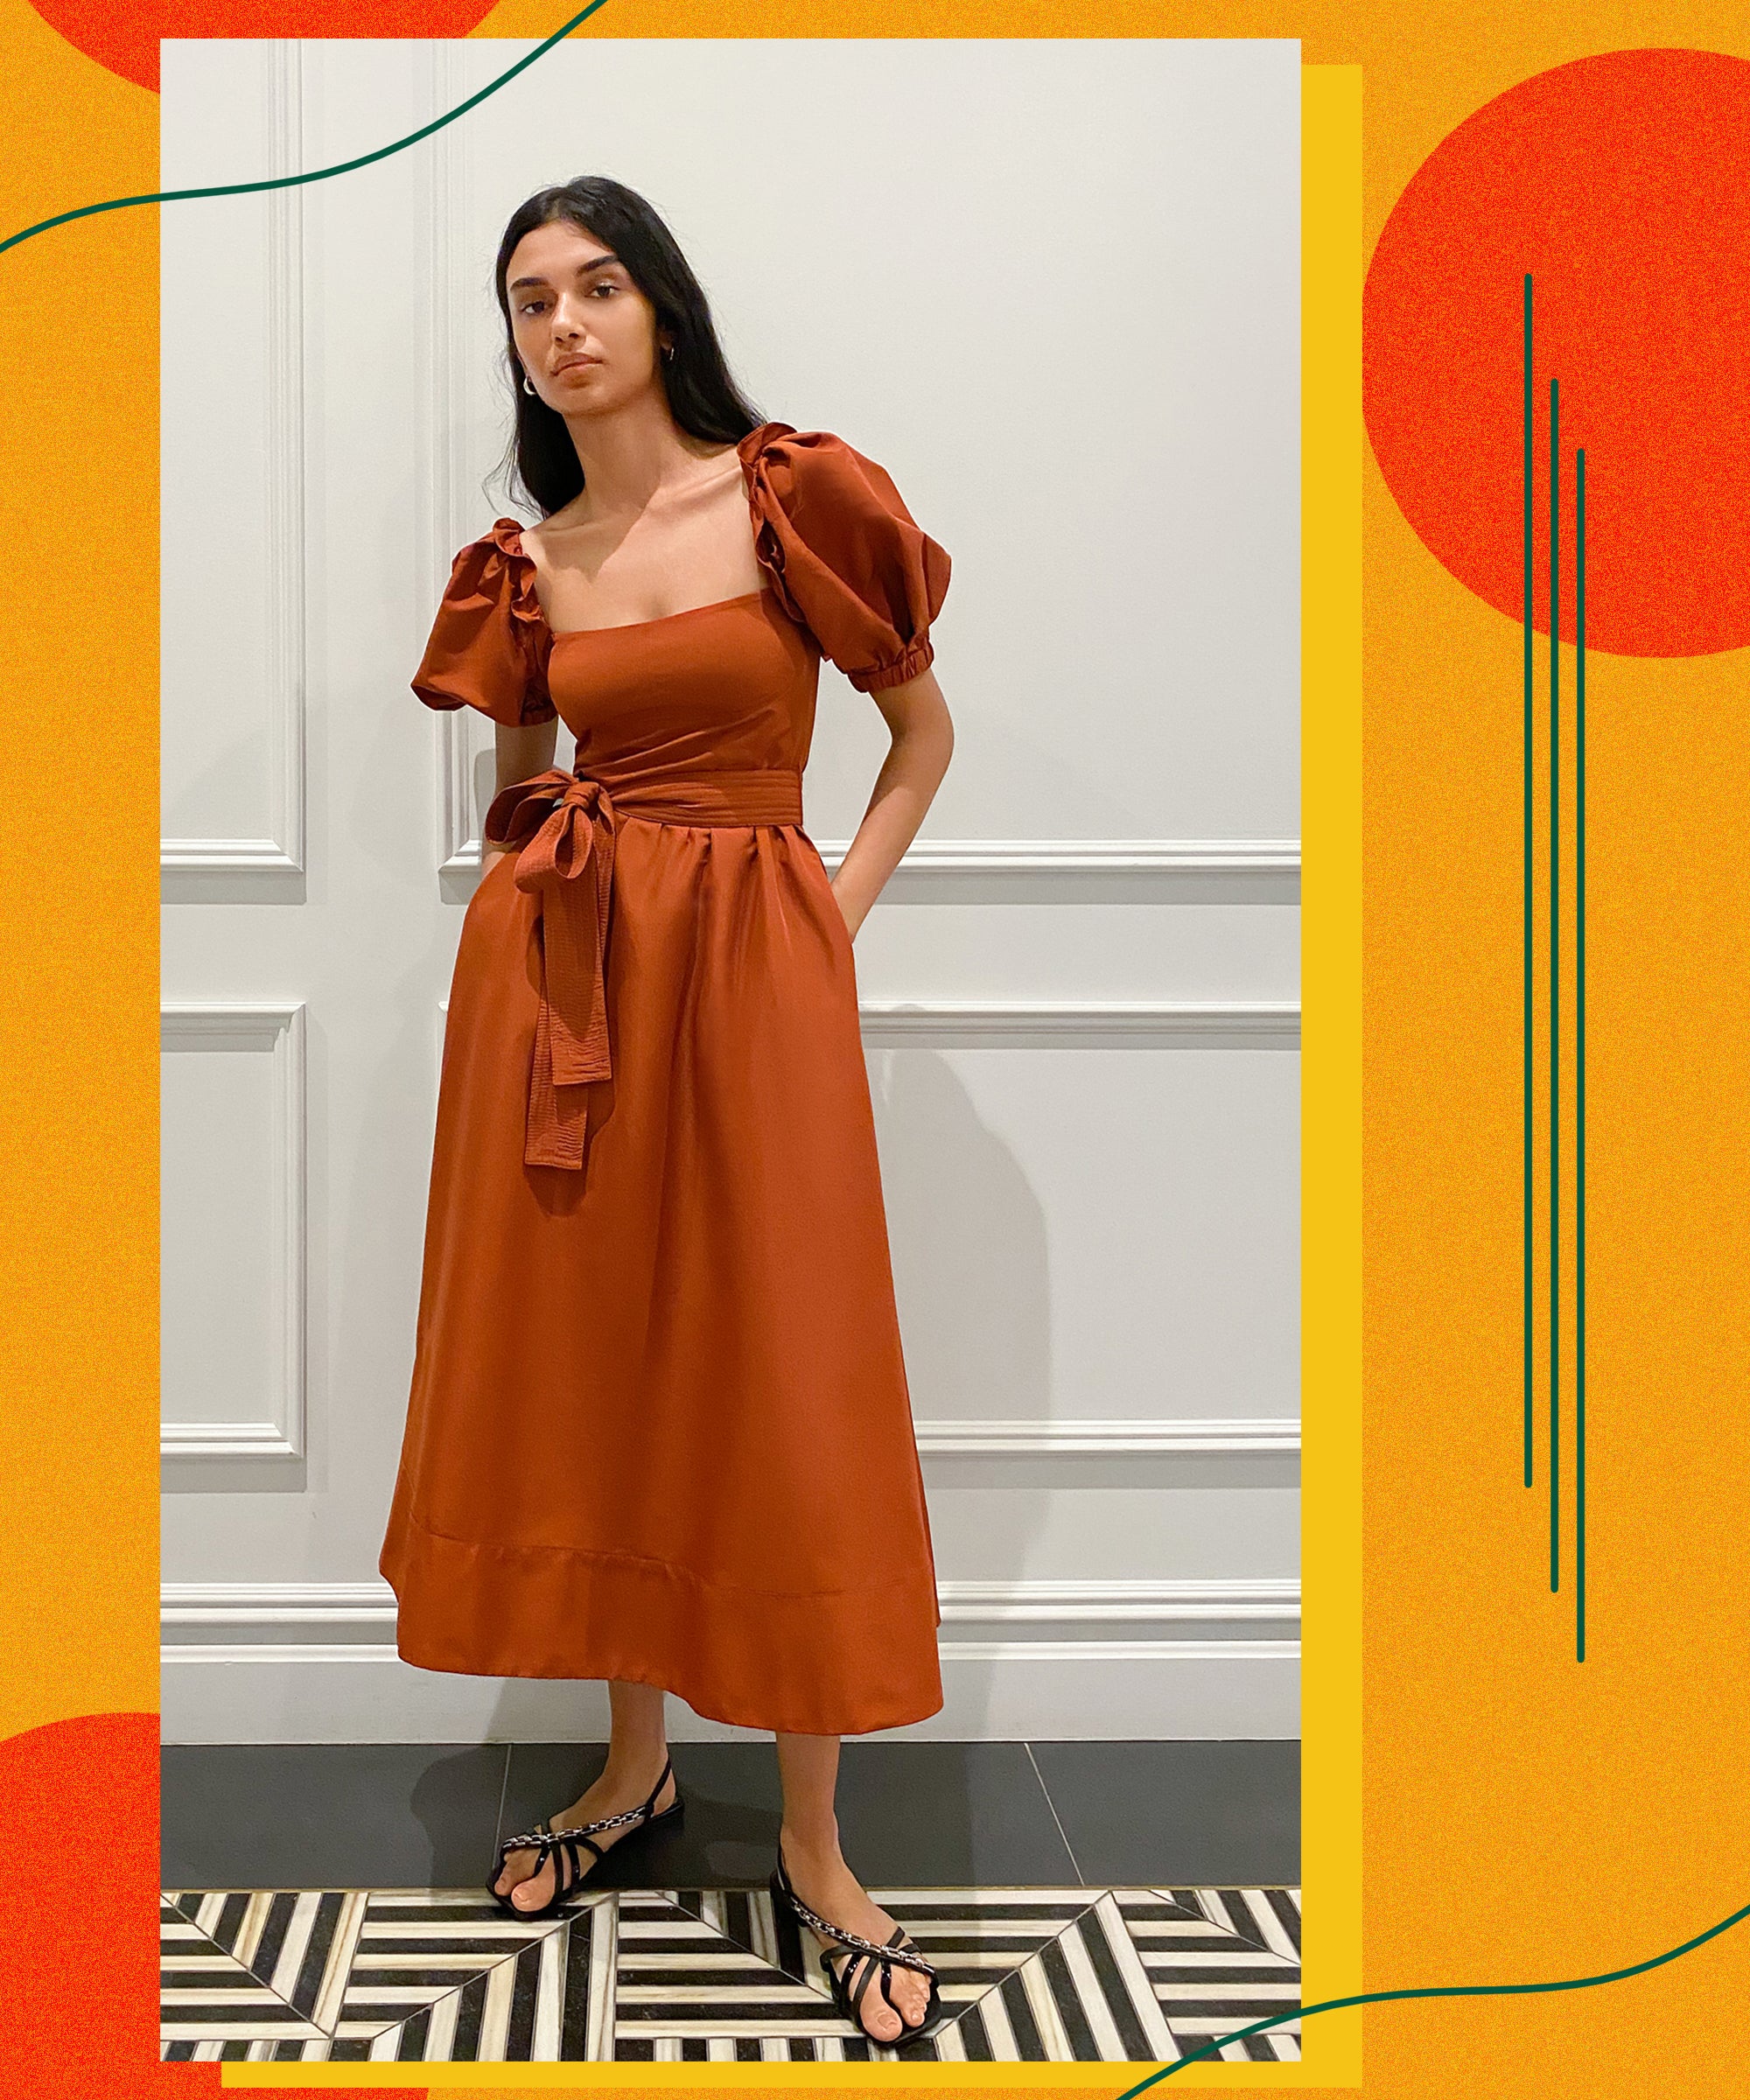 fall wedding outfits 2019